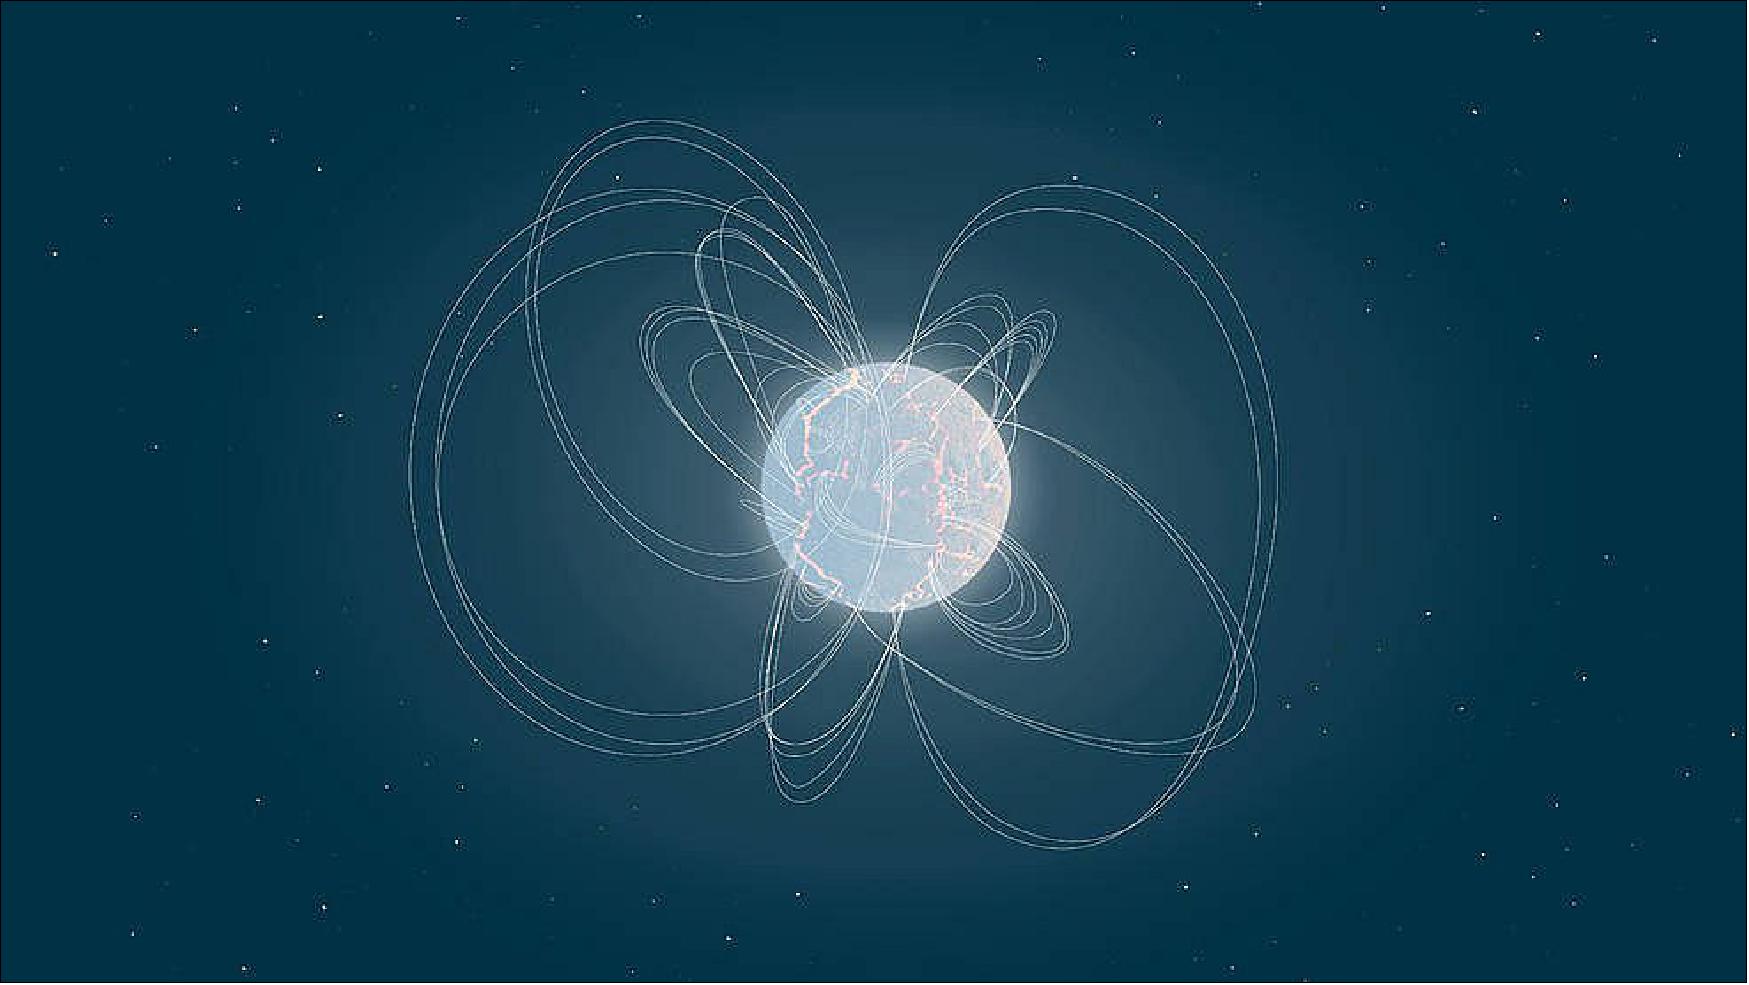 Figure 20: This illustration shows magnetic field lines protruding from a highly magnetic neutron star, or a dense nugget left over after a star goes supernova and explodes. Known as magnetars, these objects generate bright bursts of light that might be powered by their strong magnetic fields (image credit: ESA)